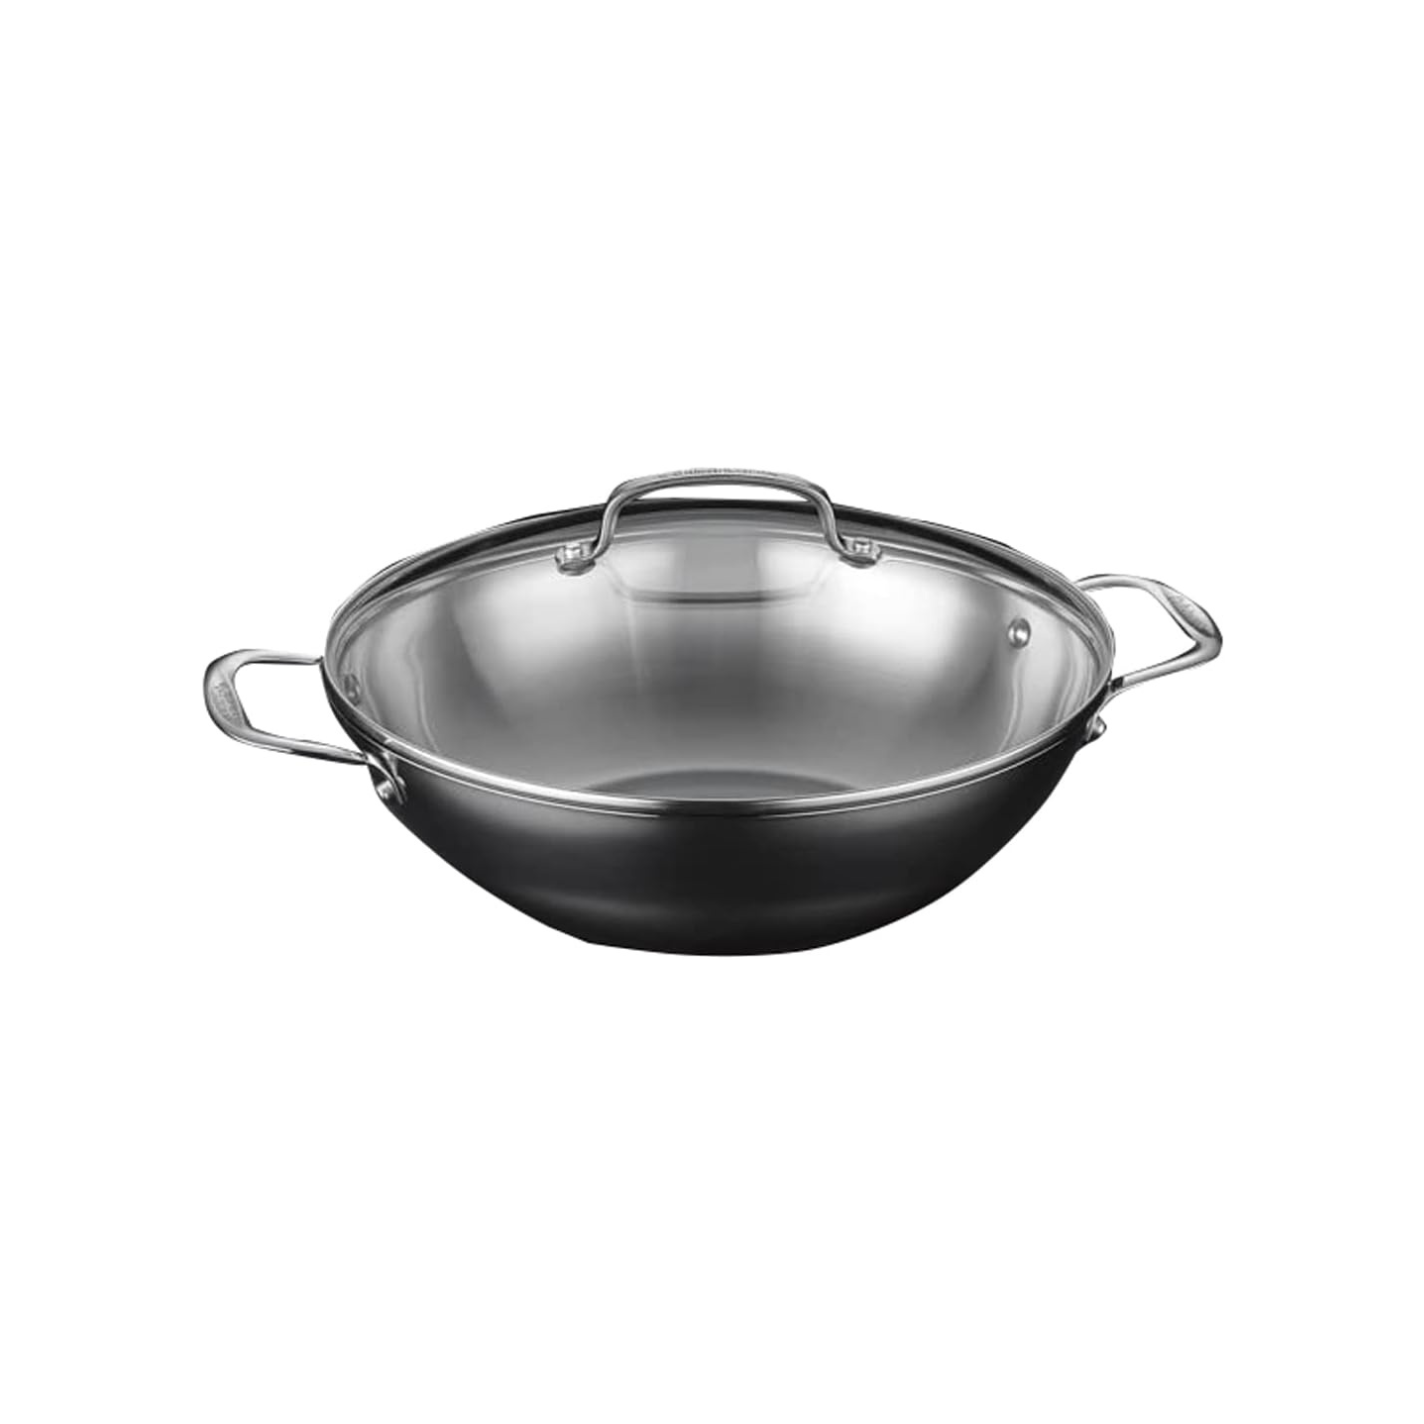 Cuisinart Stainless Steel Stir Fry & Wok Pan with Cover